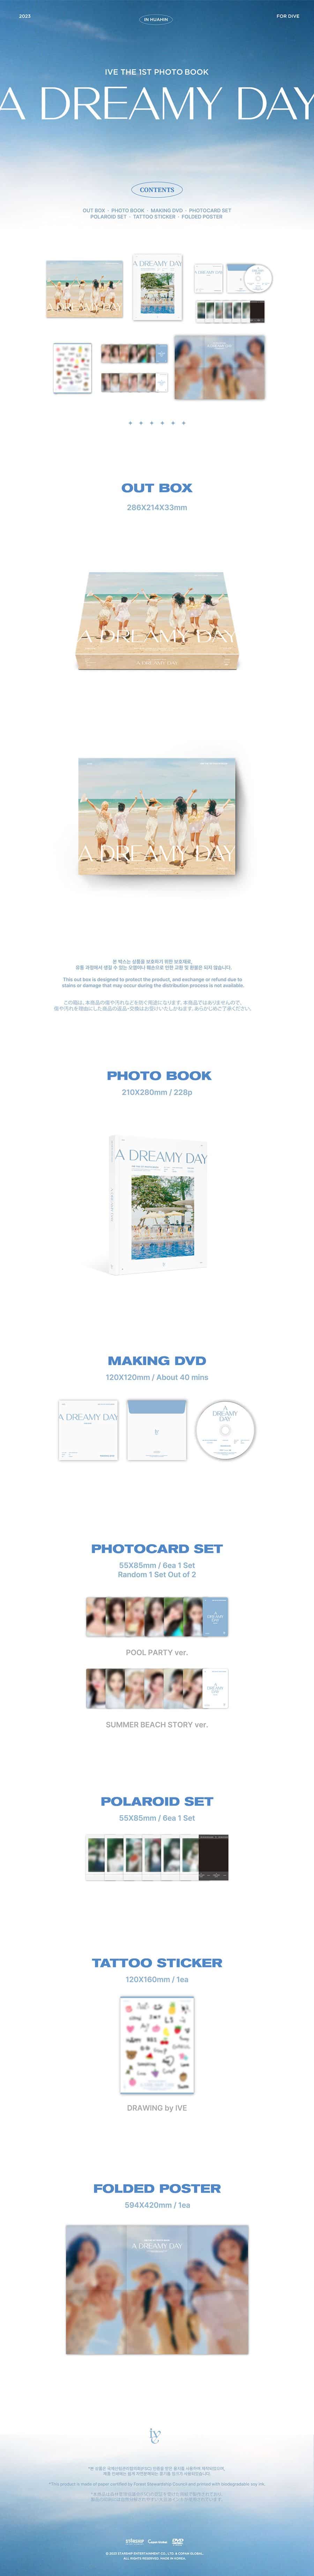 ive-the-1st-photobook-a-dreamy-day-wholesales